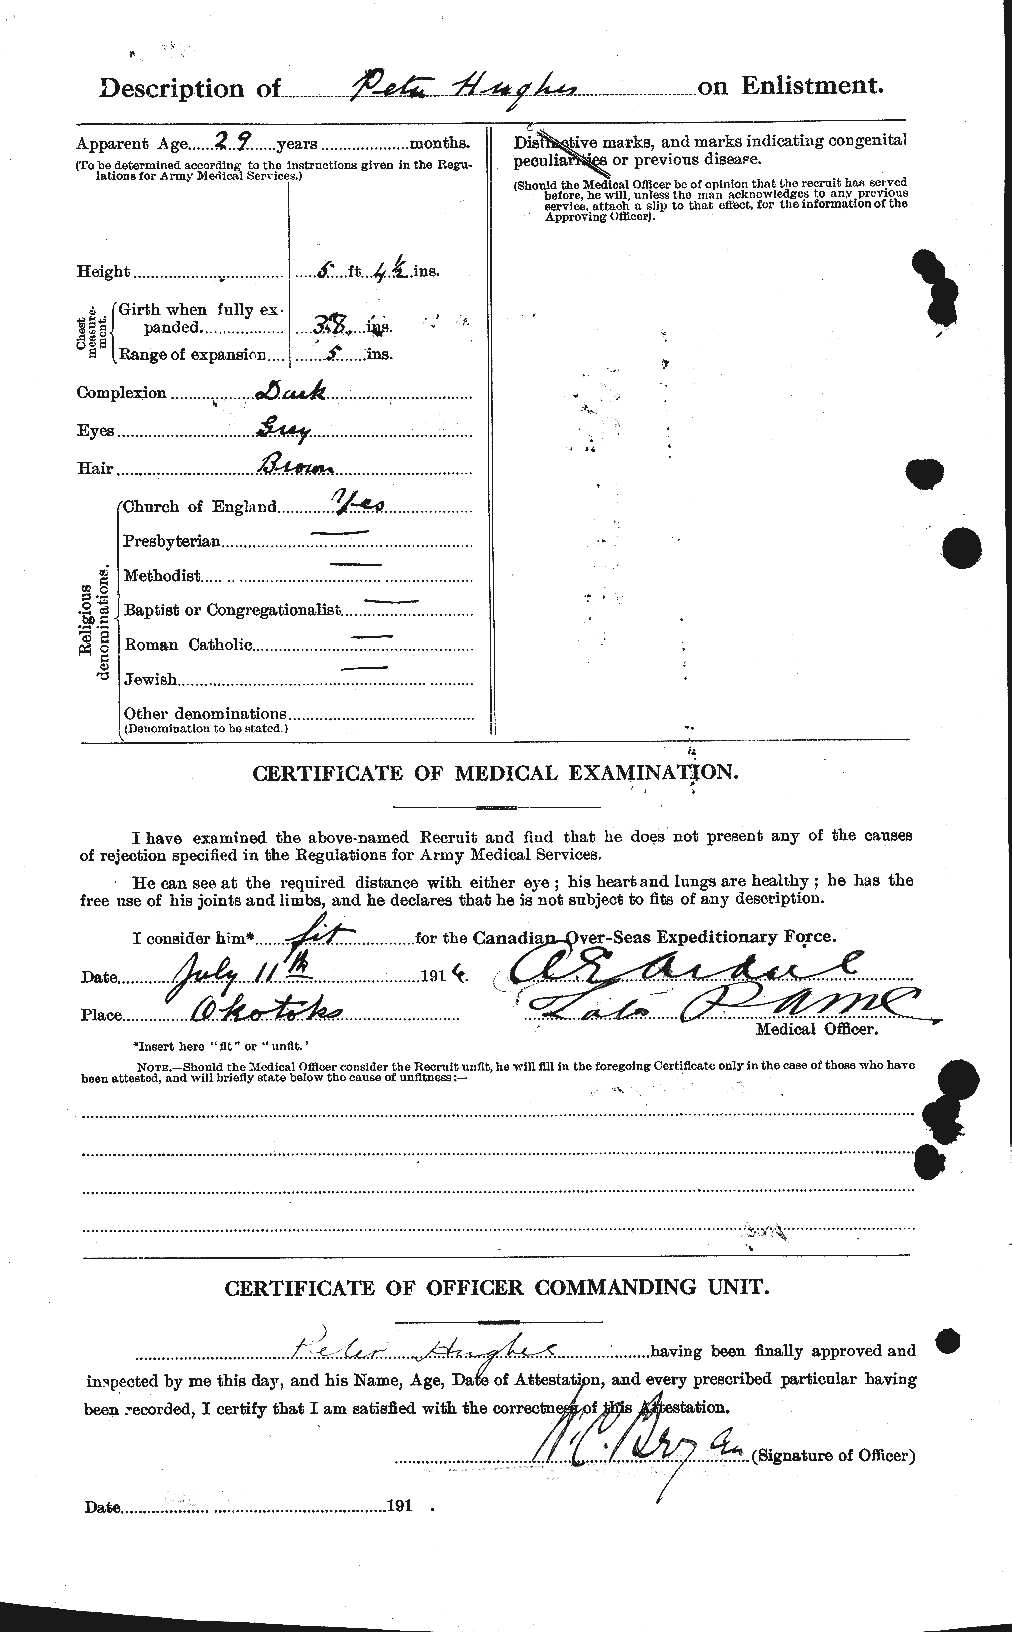 Personnel Records of the First World War - CEF 404162b